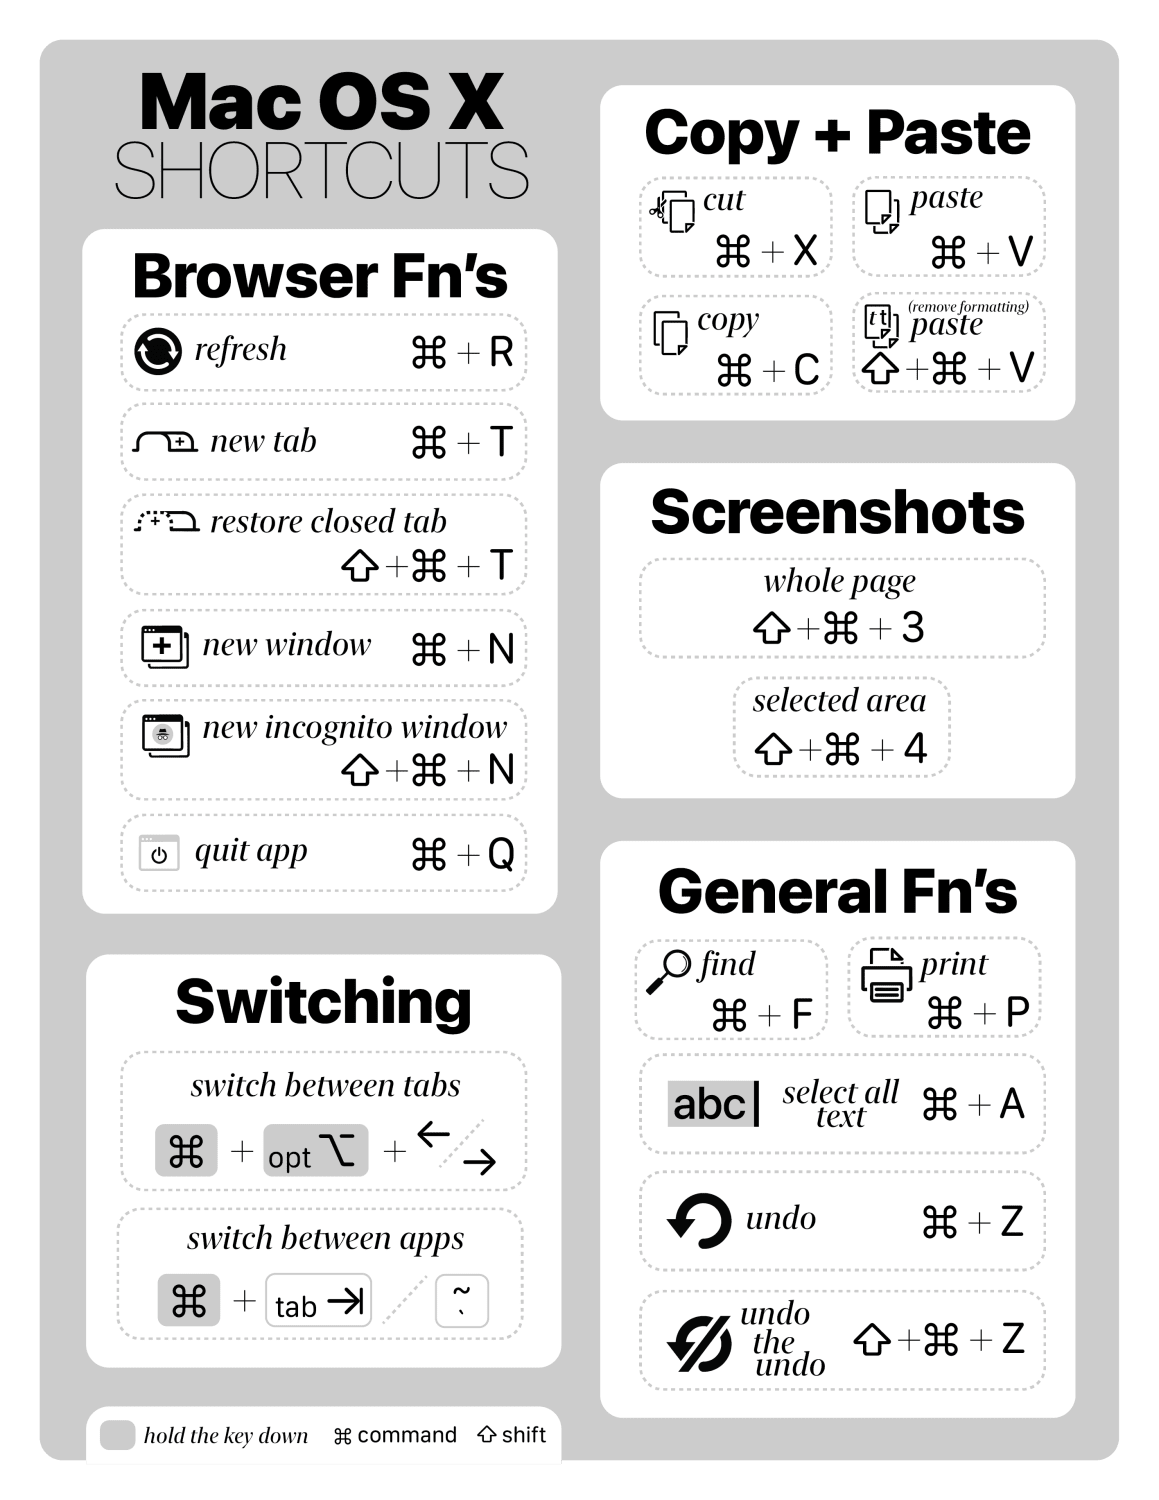 Made this Mac shortcut keyboard guide for my parents. Thought I would share